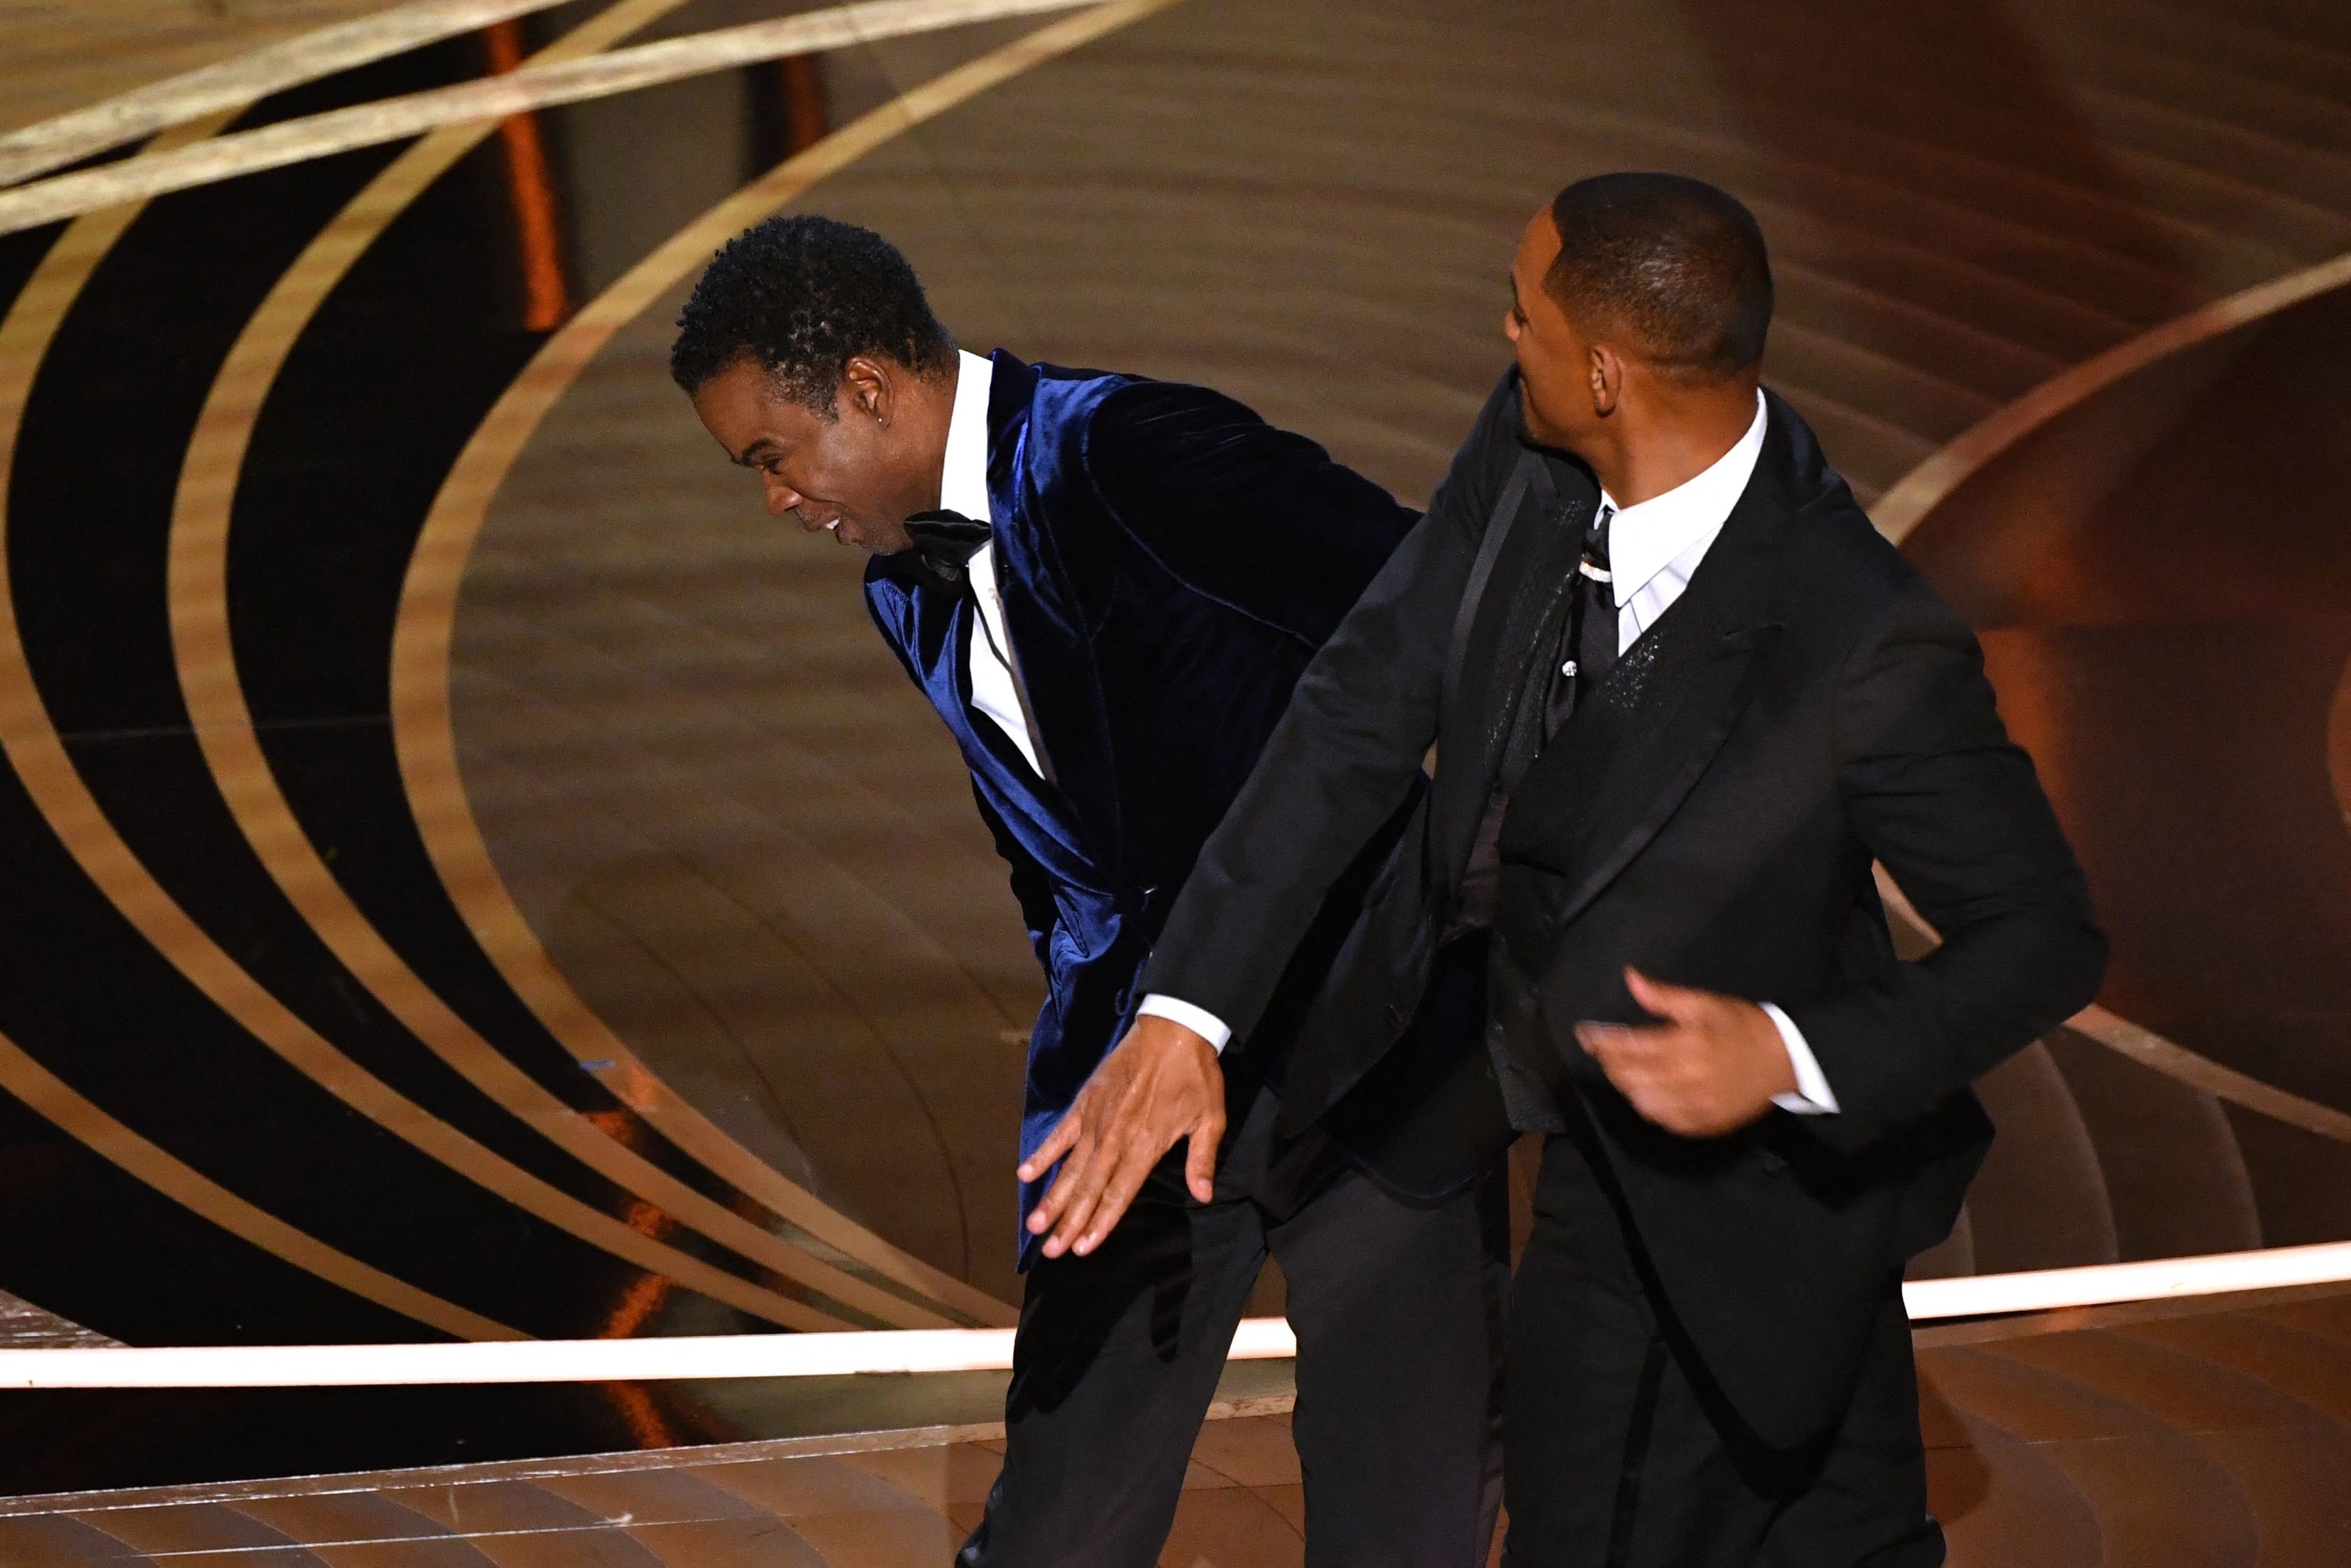 Will smith slapping chris rock in the face at the 2022 oscars ceremony